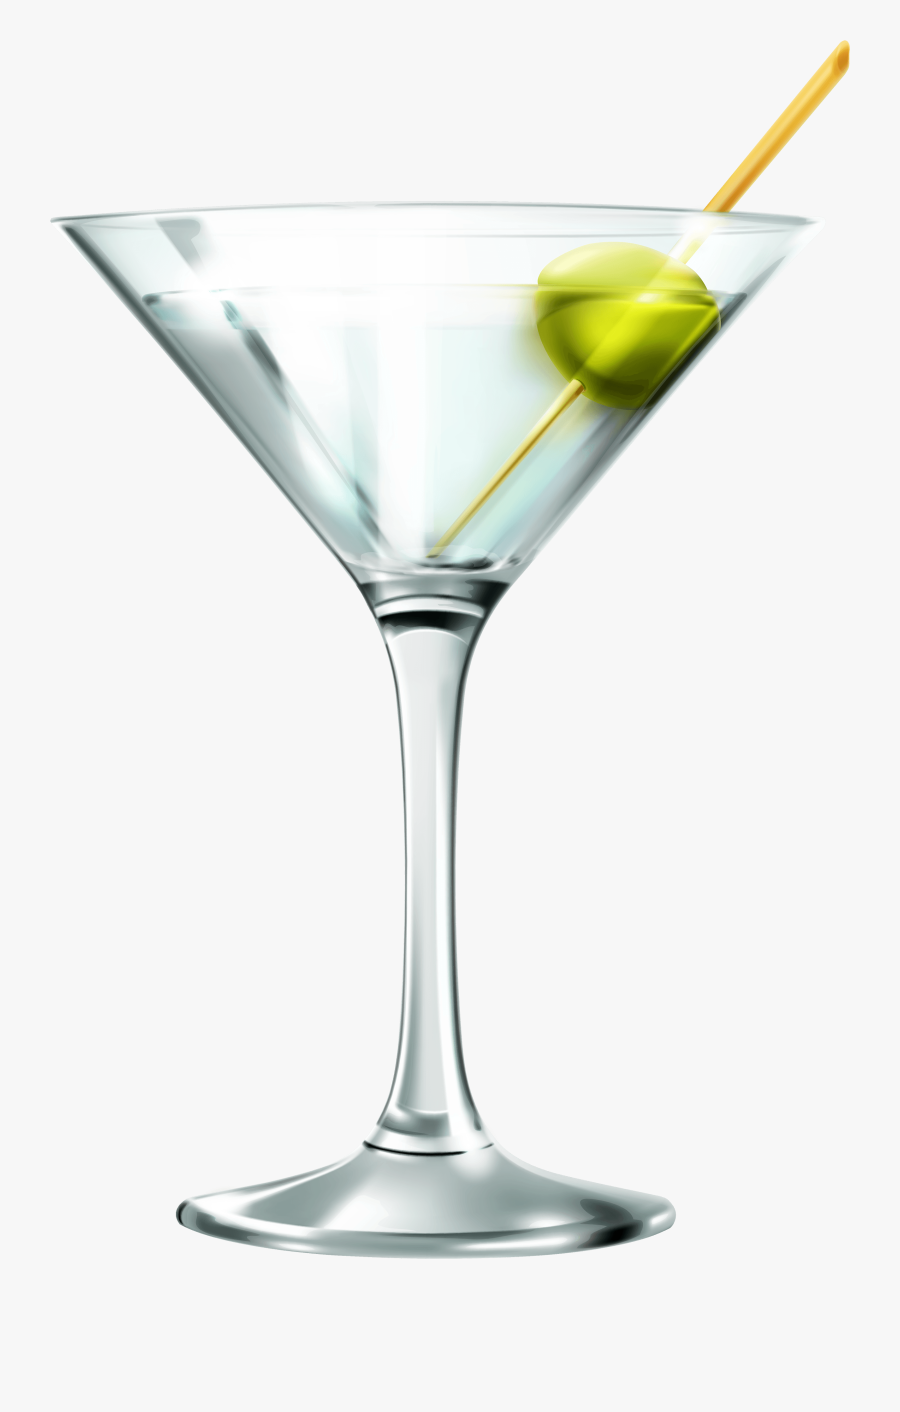 Martini Glass New Year Cliparts - Martini Glass Transparent Background, Transparent Clipart